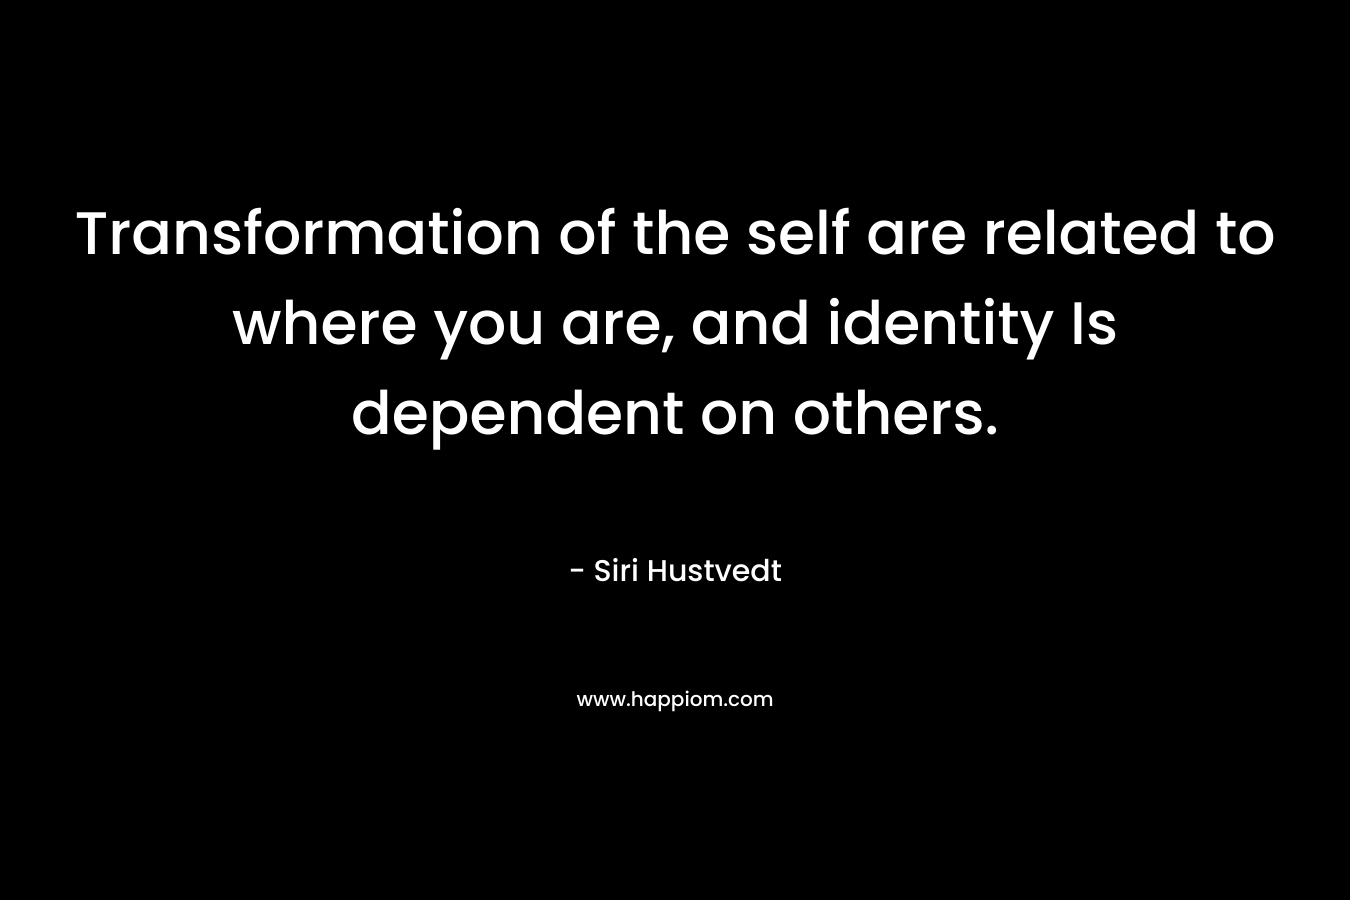 Transformation of the self are related to where you are, and identity Is dependent on others.